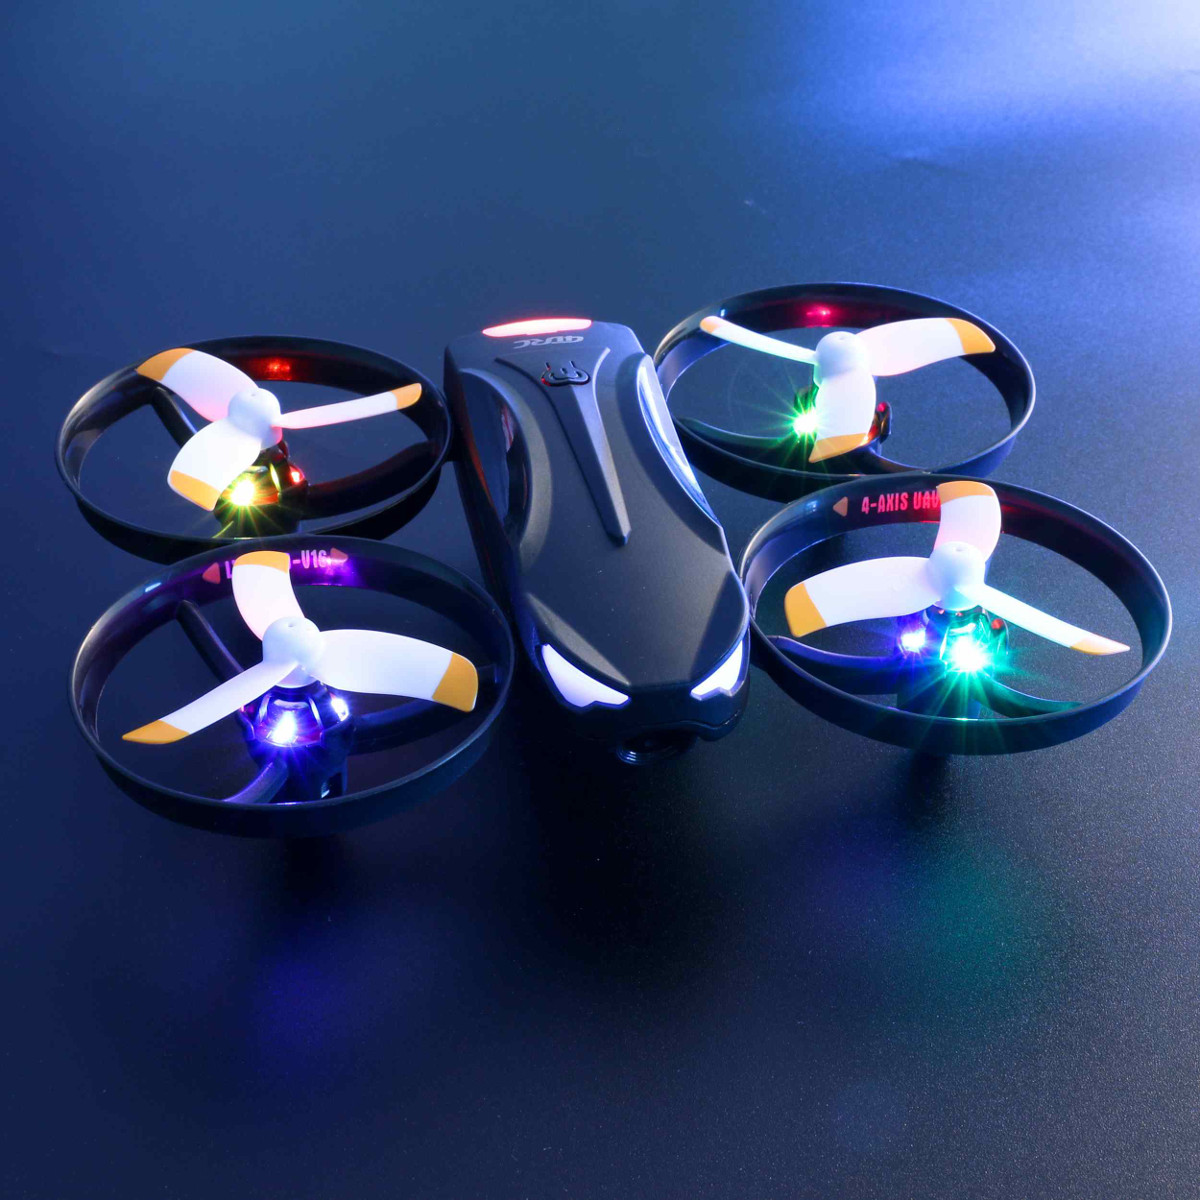 Find 4DRC V16 WiFi FPV with 6K HD 50x ZOOM Dual Camera 20mins Flight Time Altitude Hold Mode LED Colorful RC Drone Quadcopter RTF for Sale on Gipsybee.com with cryptocurrencies